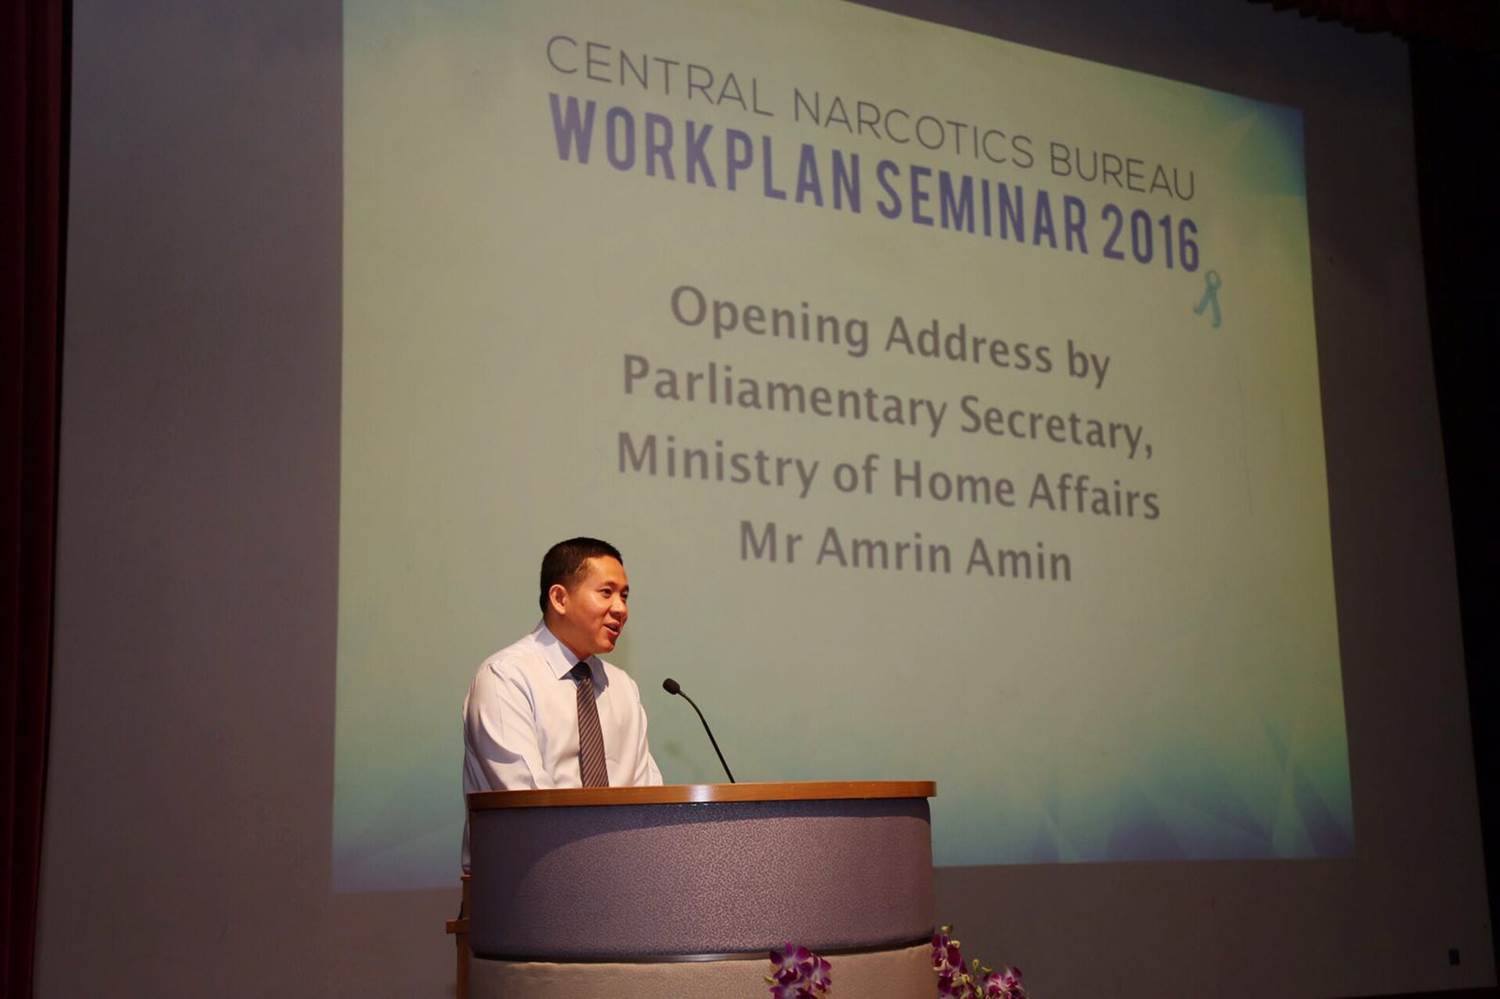 Parliamentary Secretary, Ministry of Home Affairs, Mr Amrin Amin, giving the opening address at CNB's Workplan Seminar 2016.